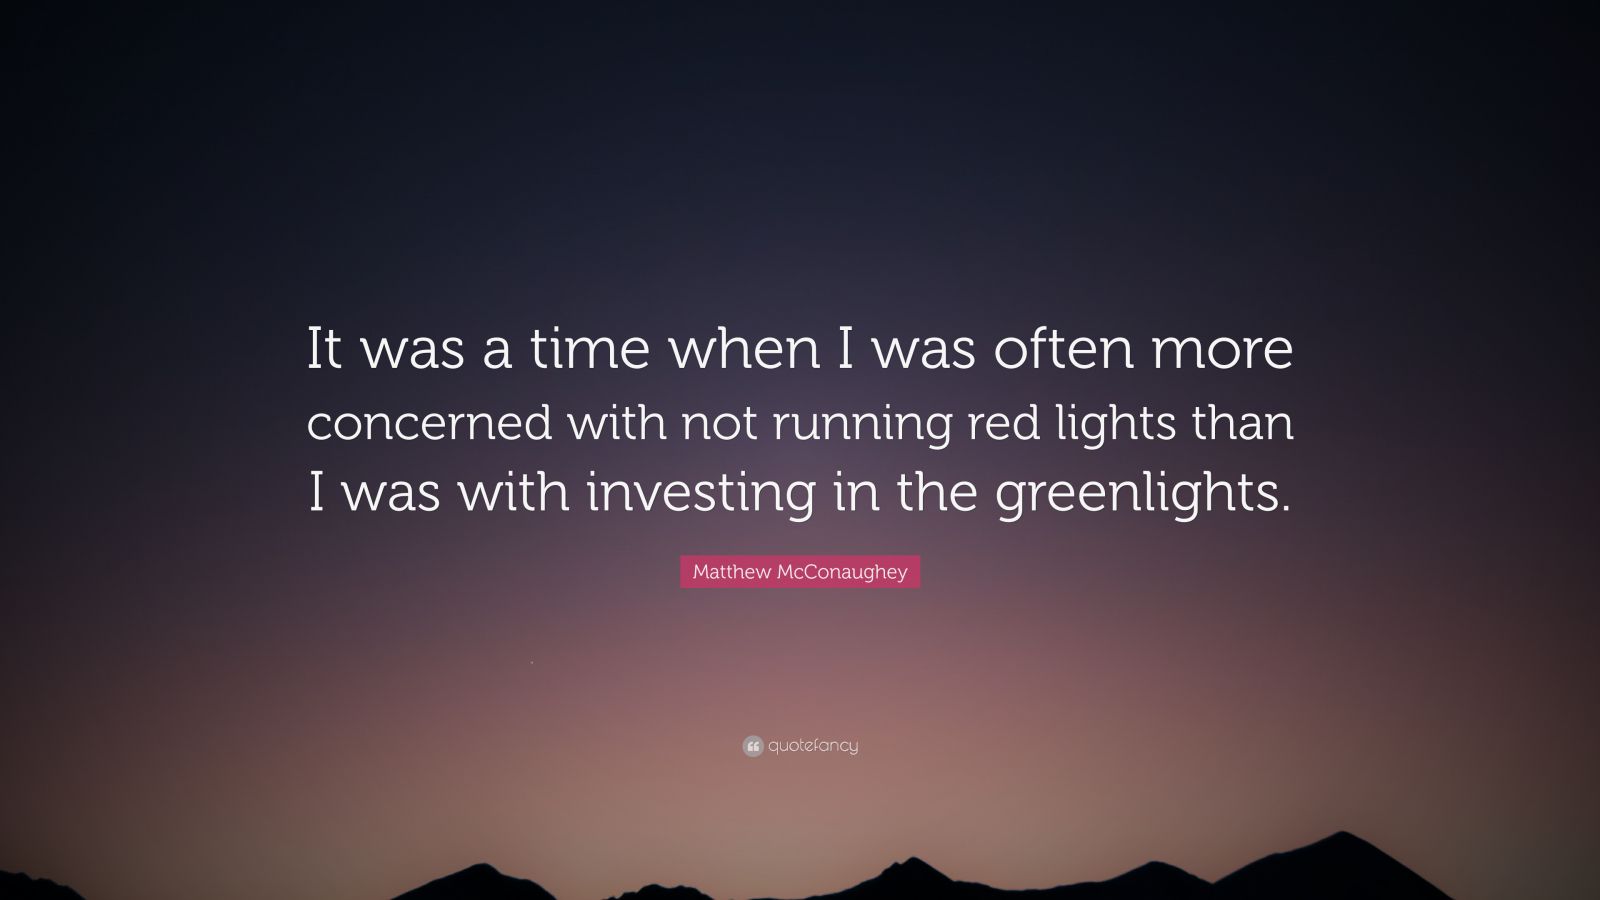 Matthew McConaughey Quote: “It was a time when I was often more ...